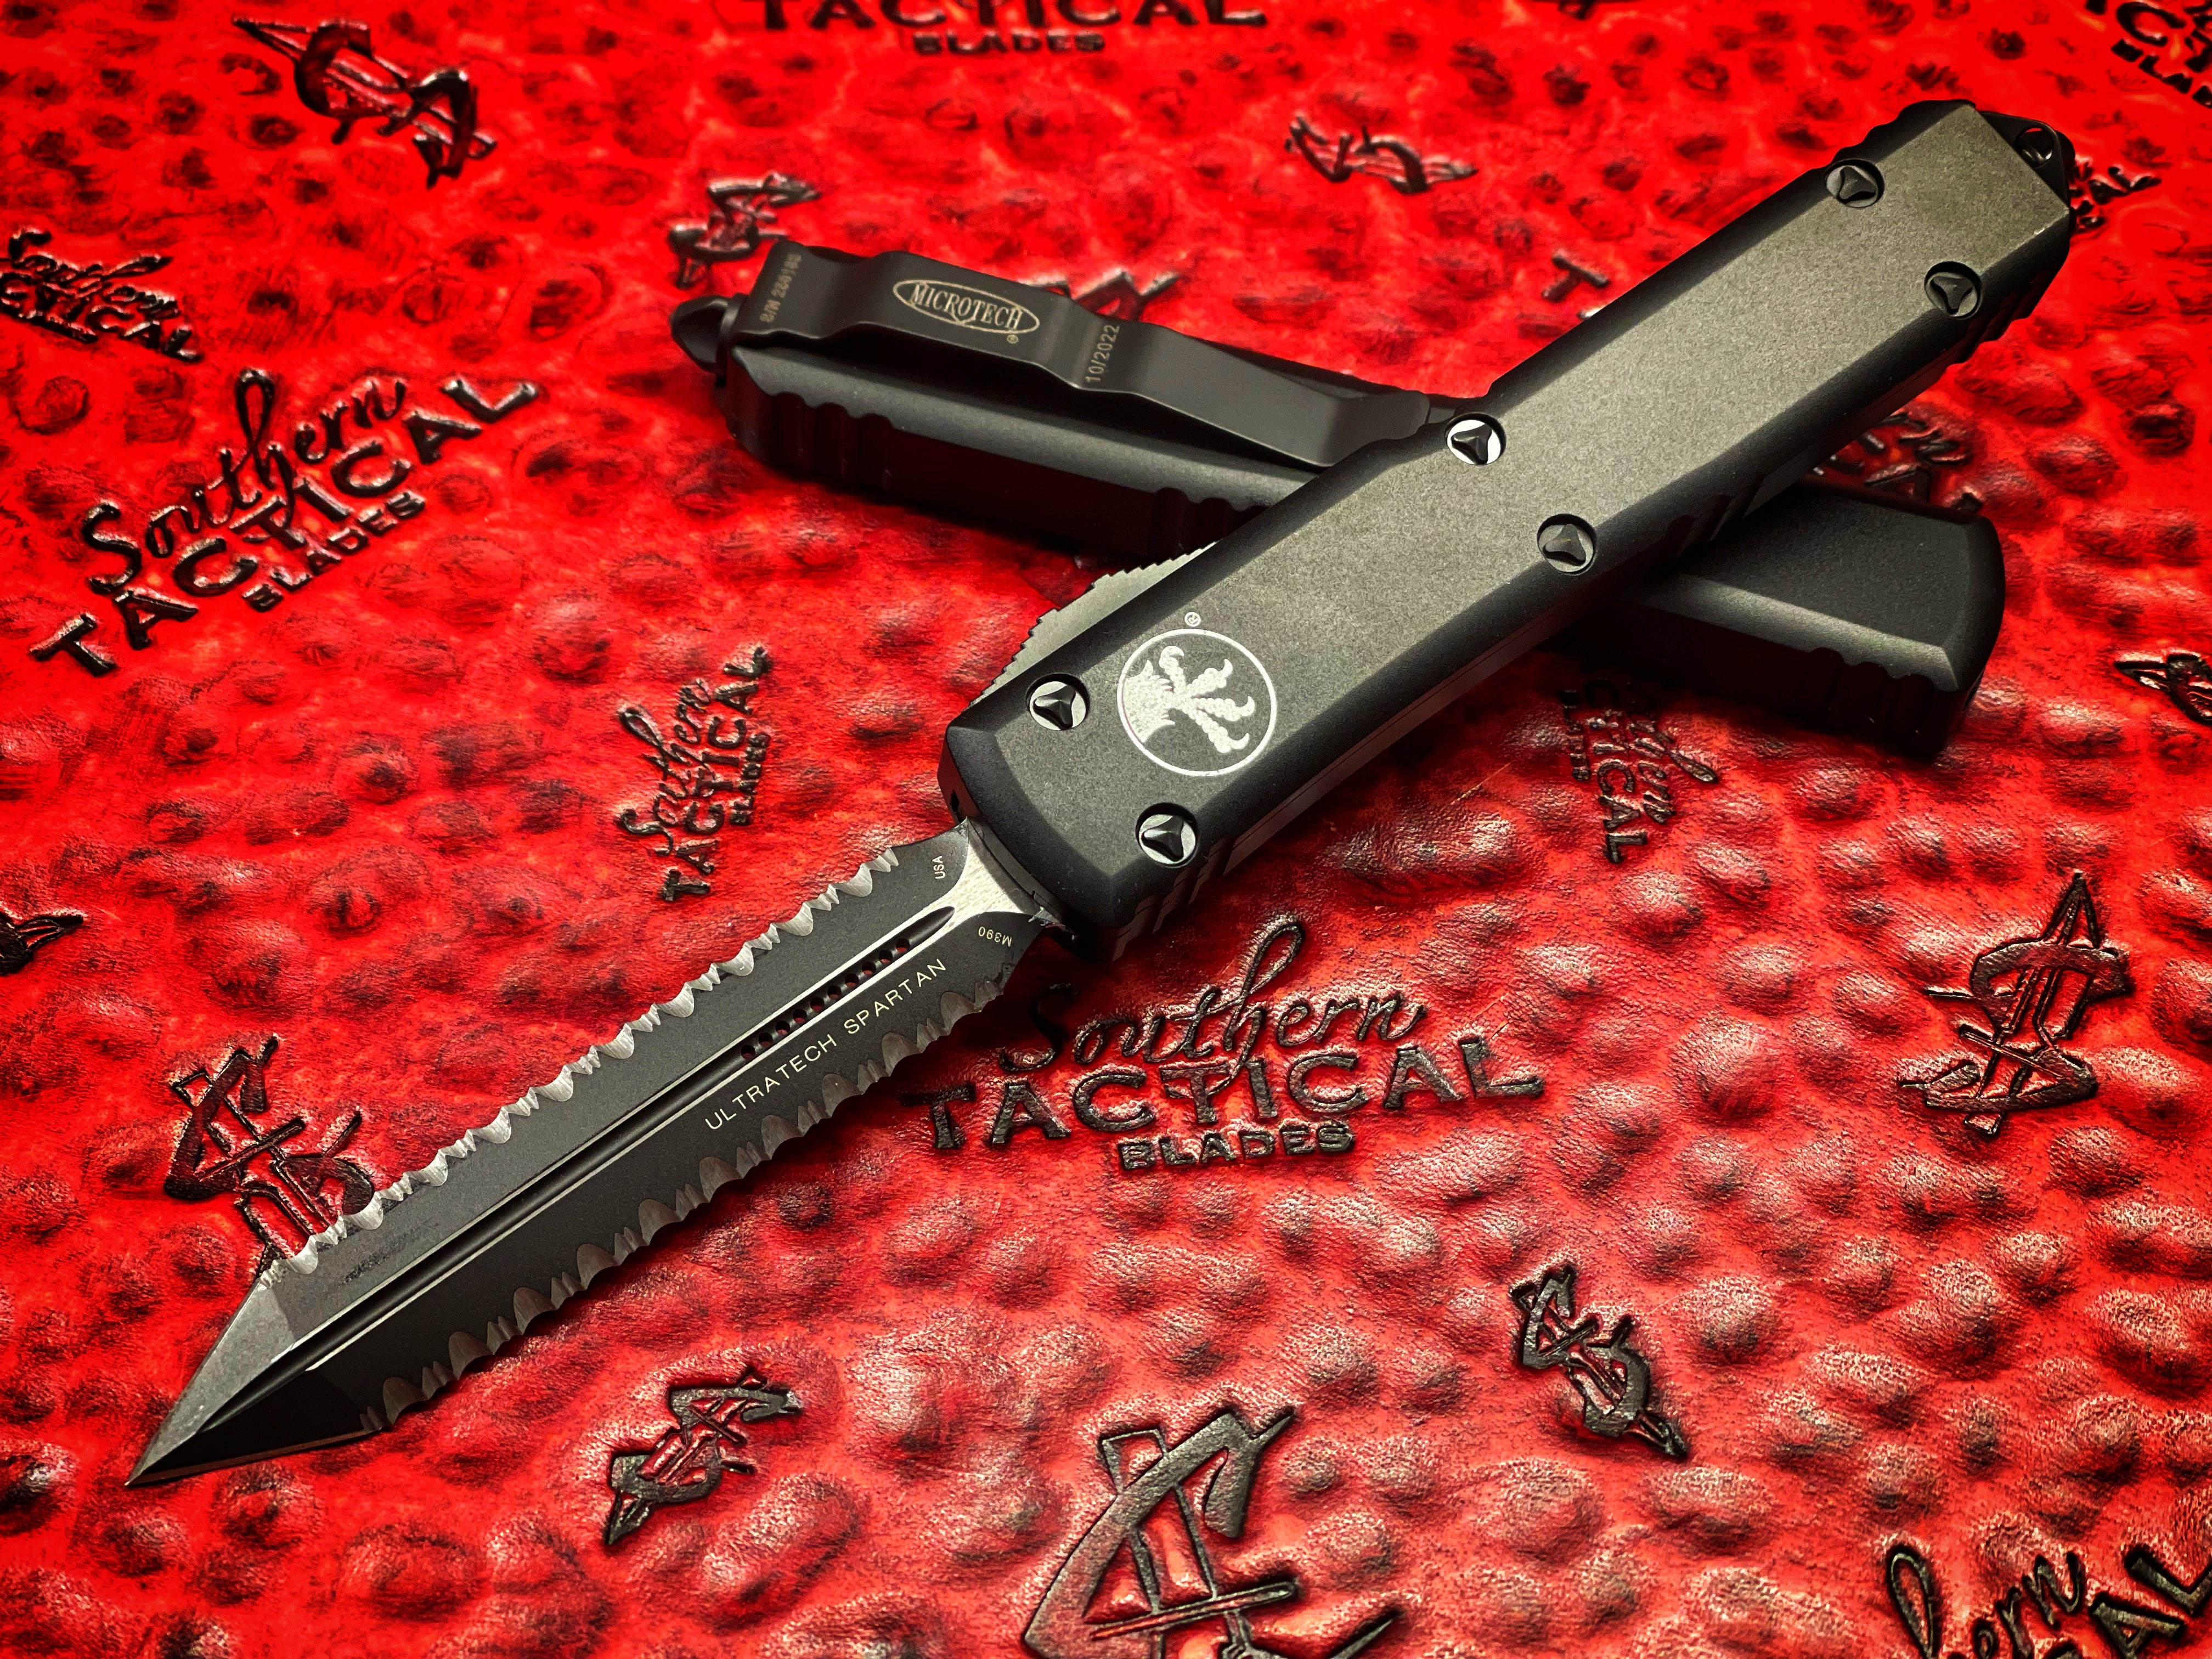 Microtech Ultratech Spartan Black Tactical Double Full Serrated